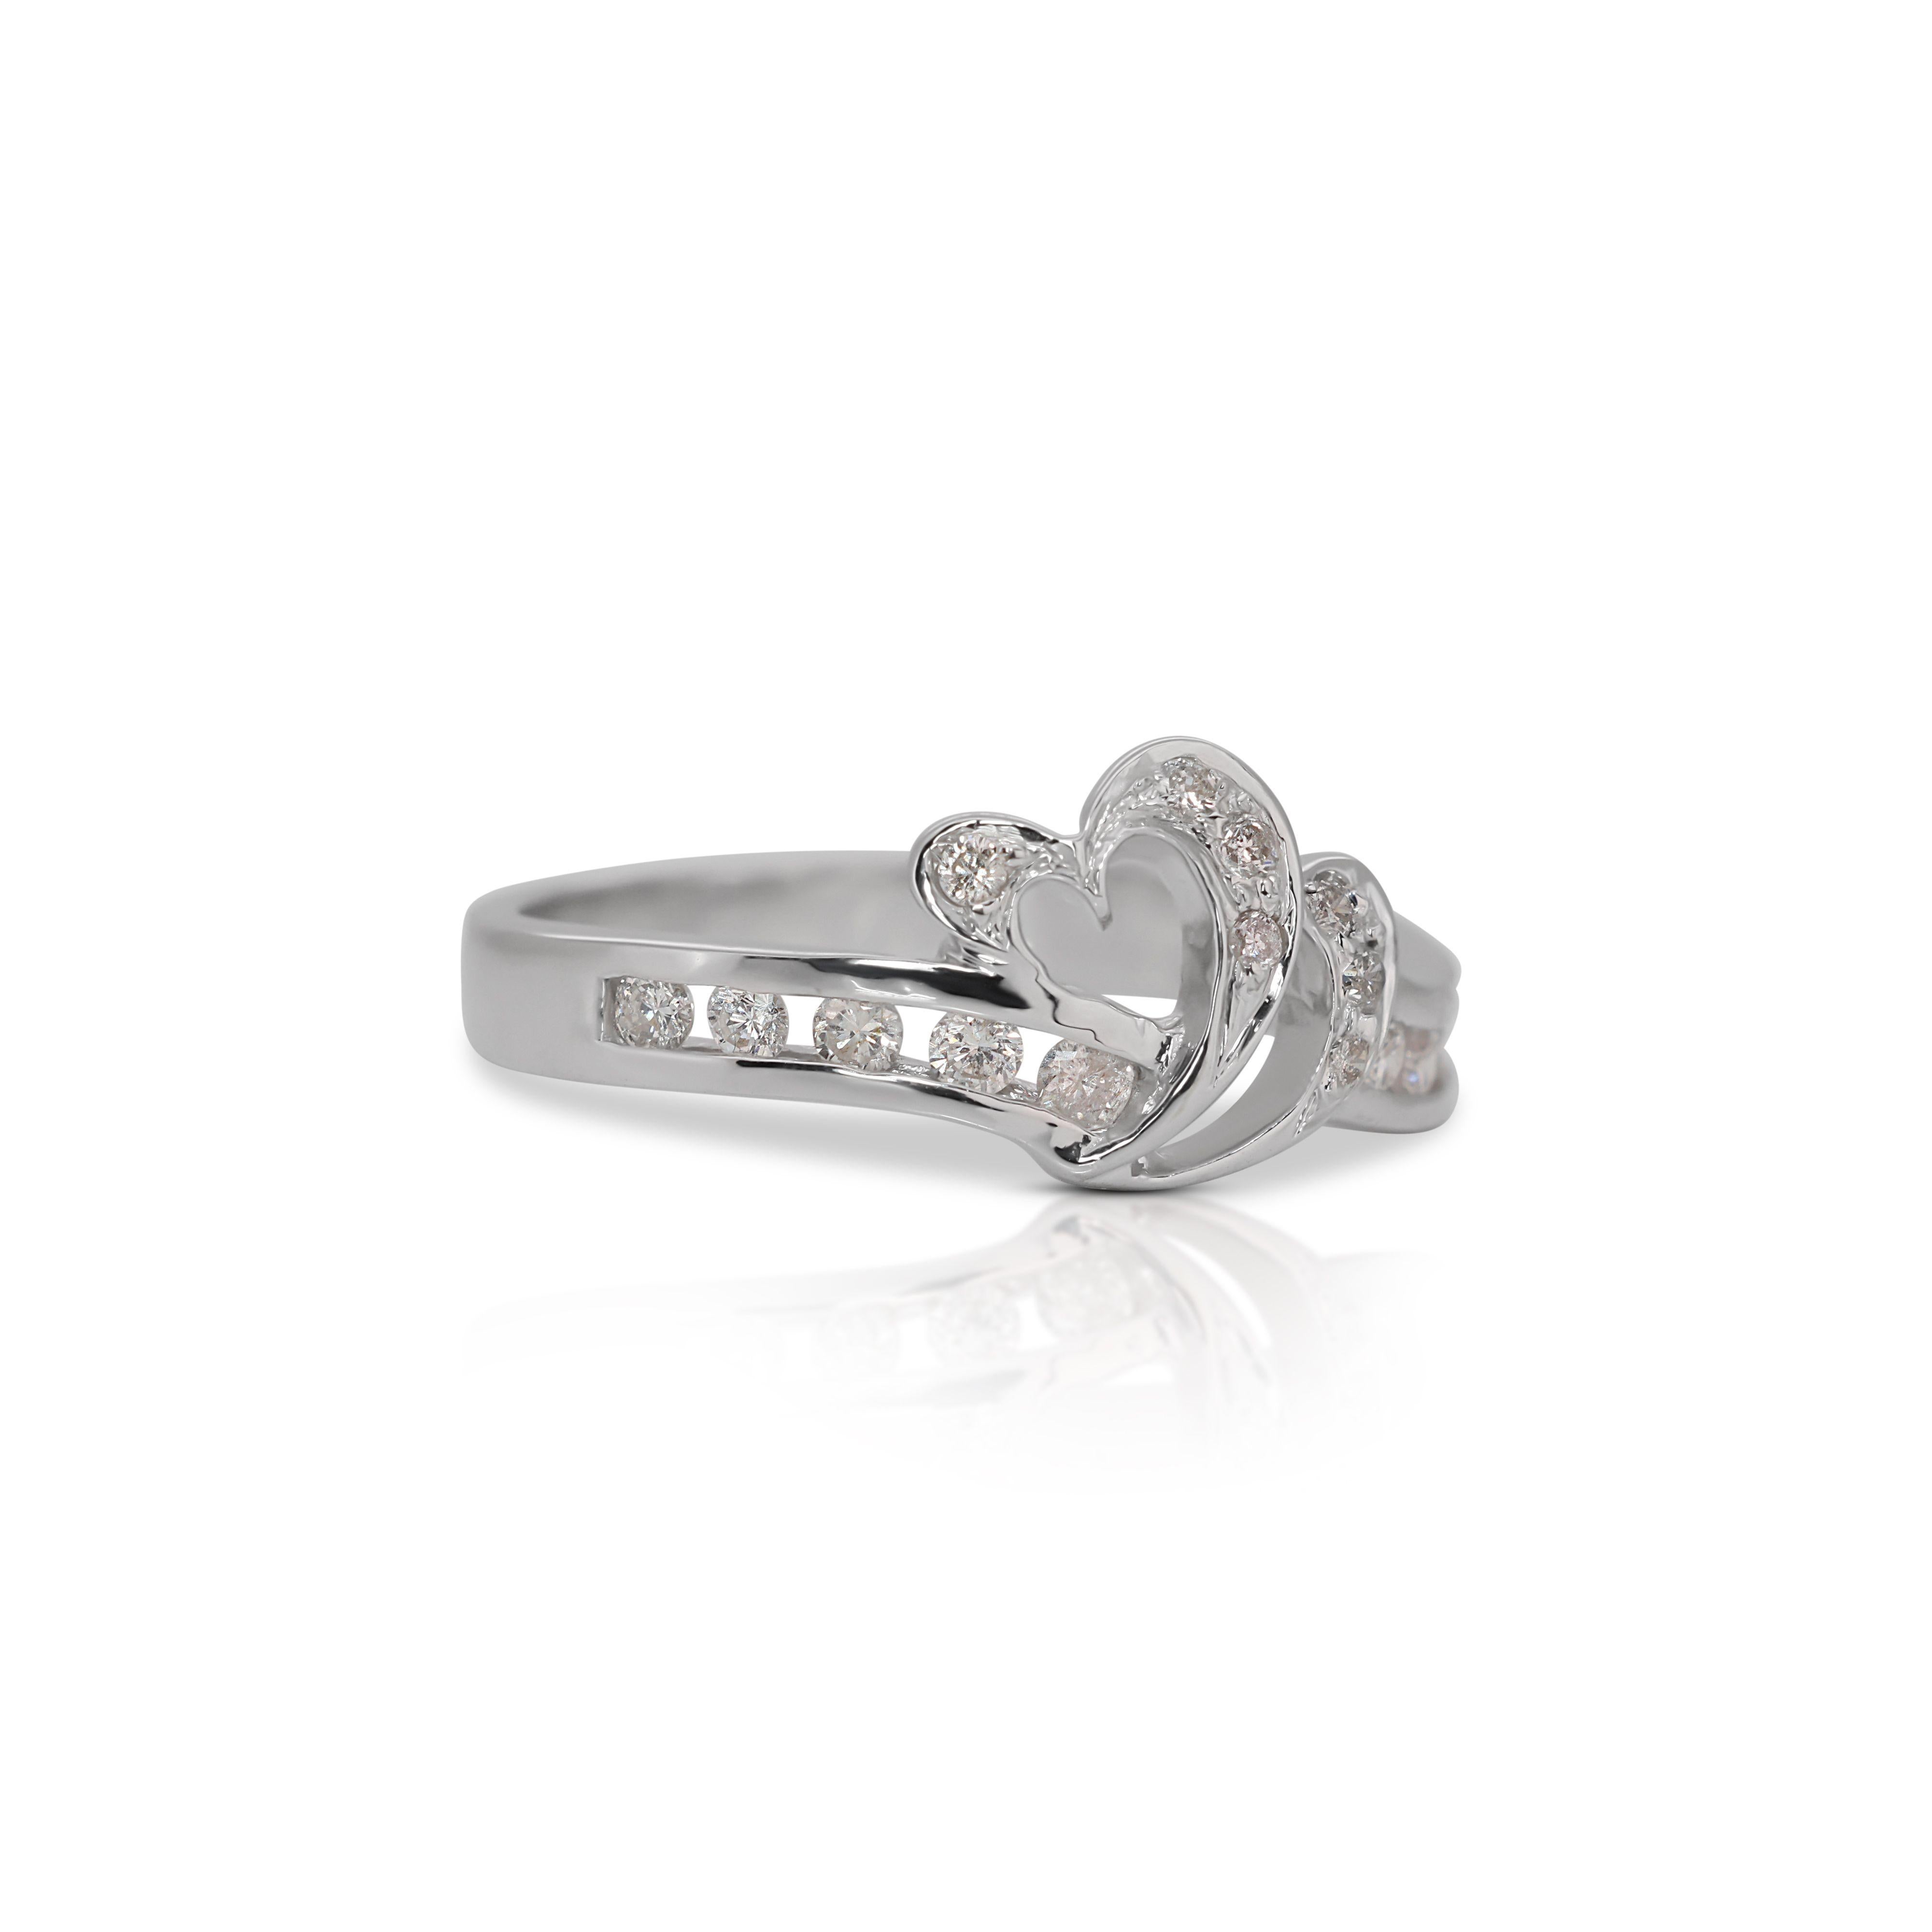 This Stunning Heart-shaped Diamond Ring is a symbol of love and devotion, perfect for marking special occasions, such as engagements, anniversaries, or as a heartfelt gift. Its design exudes classic beauty and complements a wide range of styles,